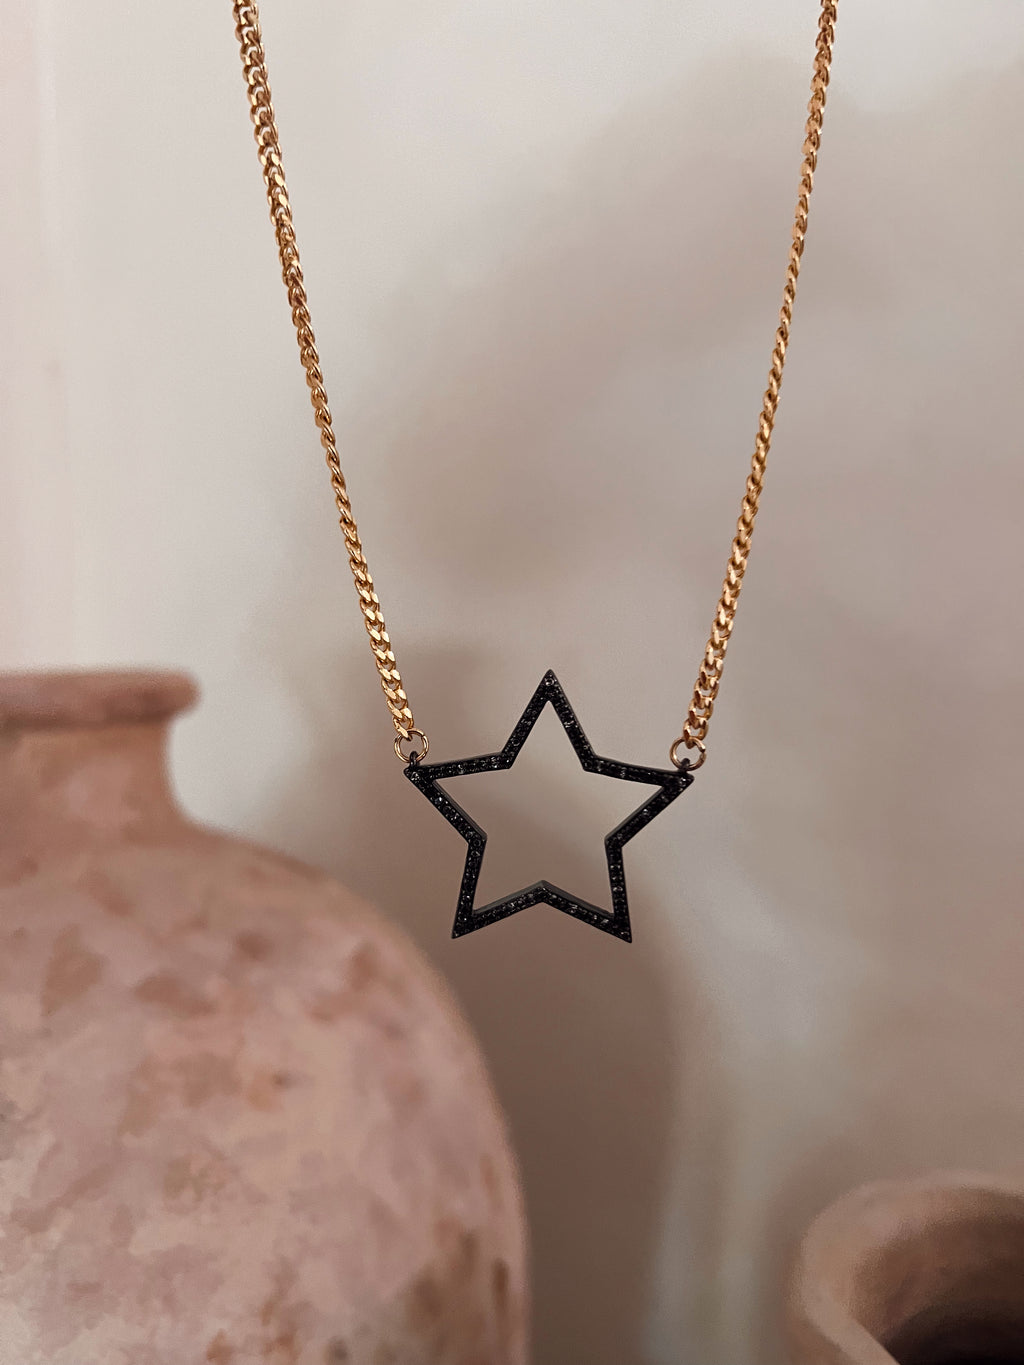 ALL STAR NECKLACE